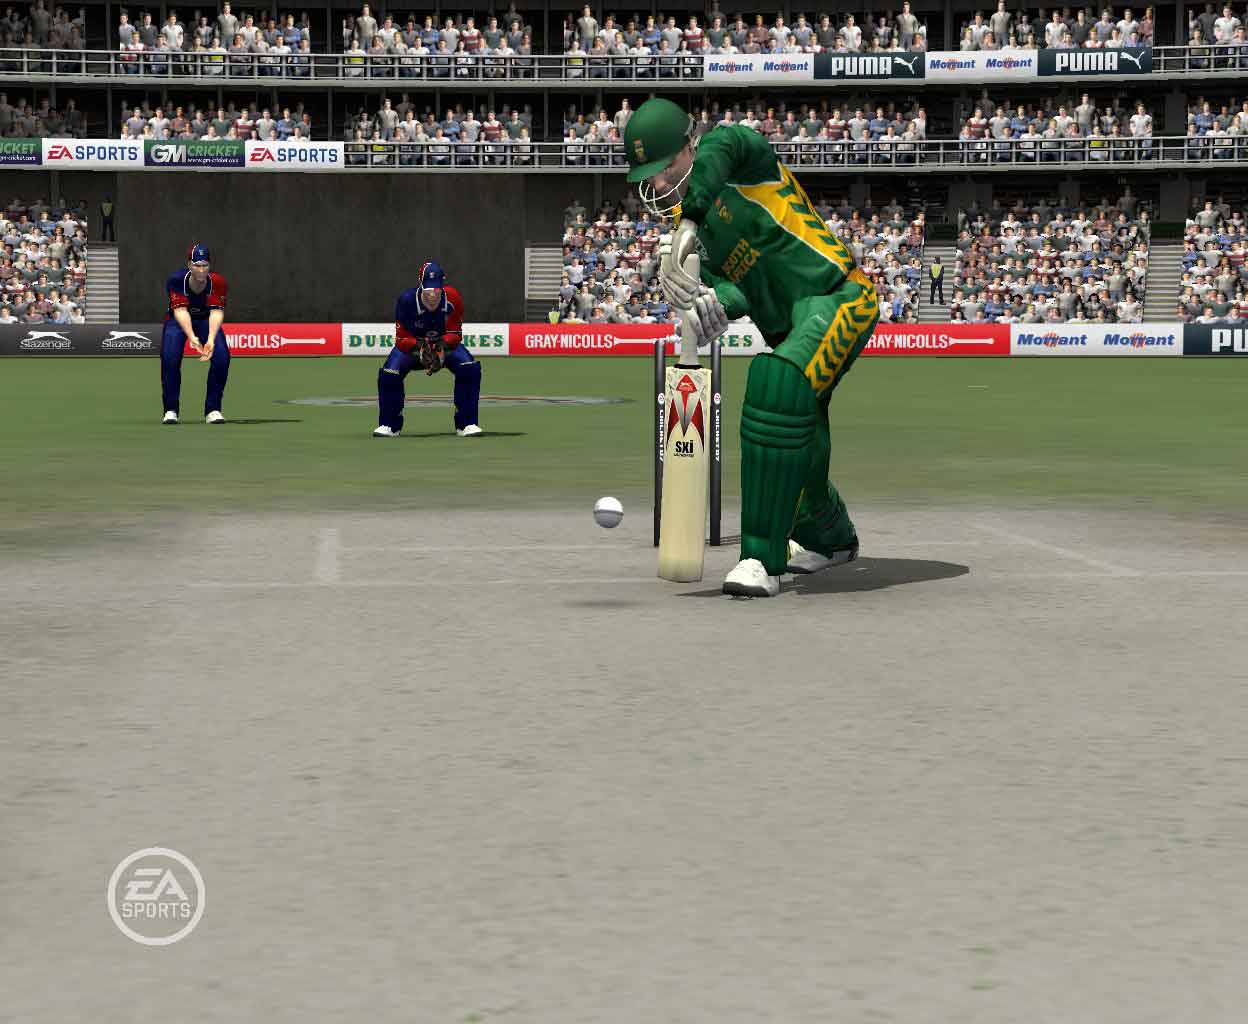 ea sports cricket 2007 save files download